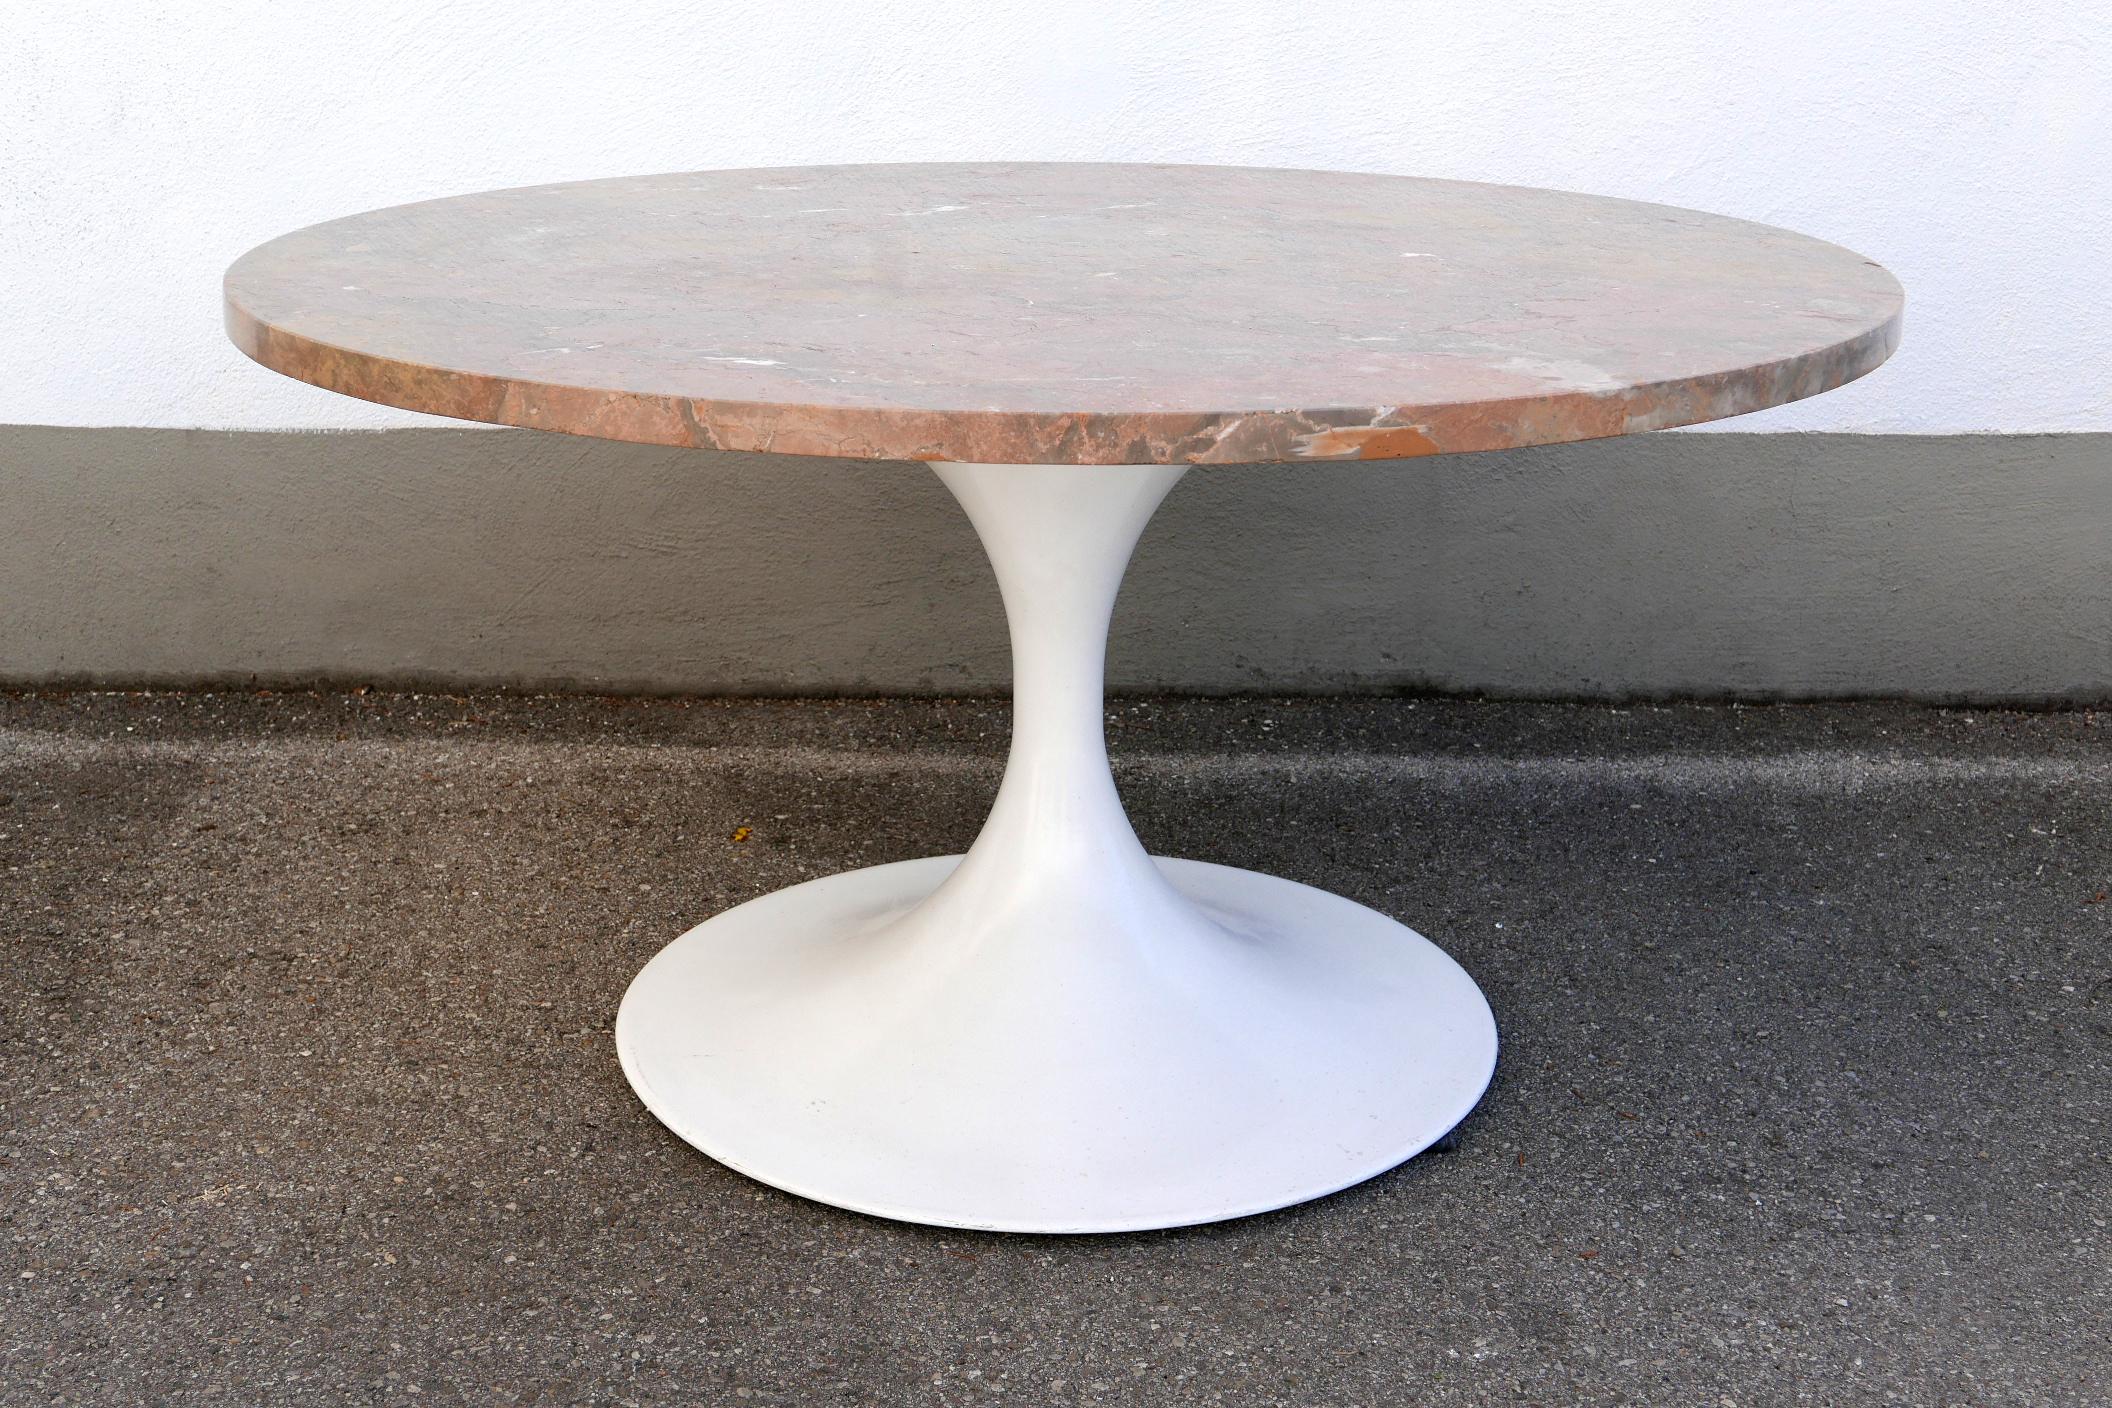 Mid-20th Century Rare Mid-Century Modern Tulip Base Marble Coffee Table by Honsel, Germany, 1960s For Sale